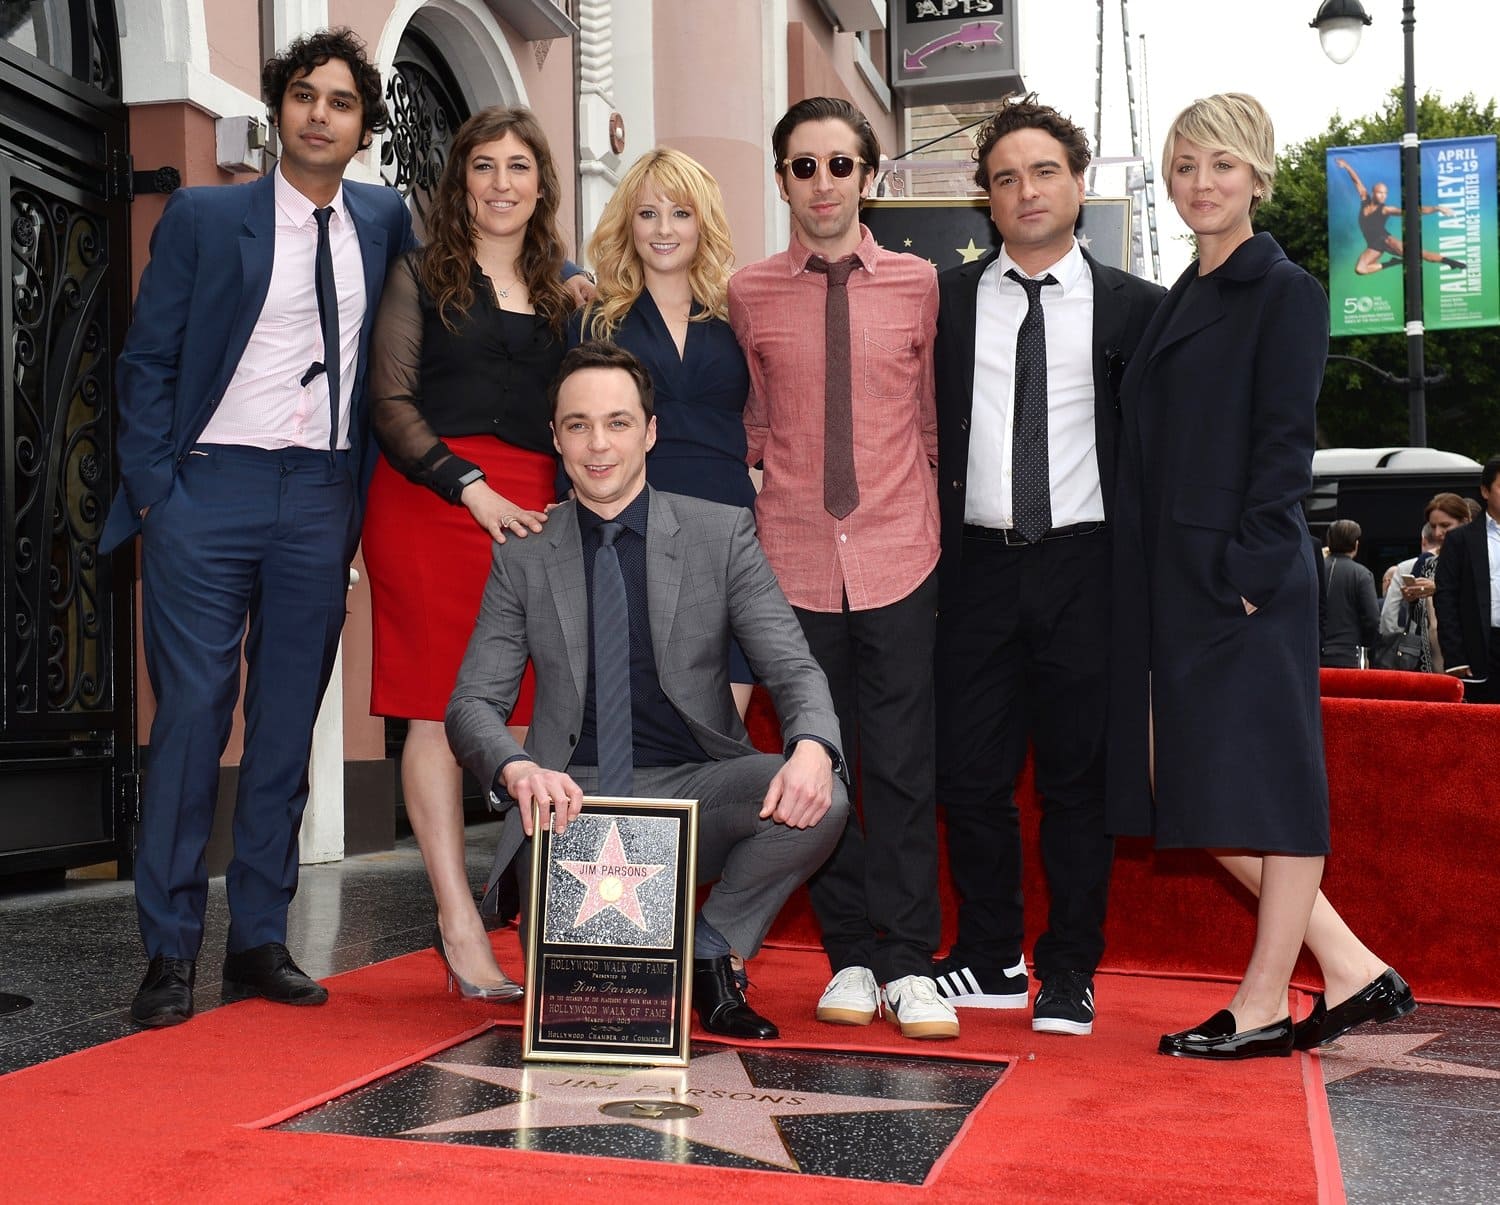 Actors Jim Parsons, Kunal Nayyar, Mayim Bialik, Melissa Rauch, Simon Helberg, Johnny Galecki, and Kaley Cuoco-Sweeting attend a ceremony honoring Jim Parsons with the 2,545th Star on The Hollywood Walk Of Fame